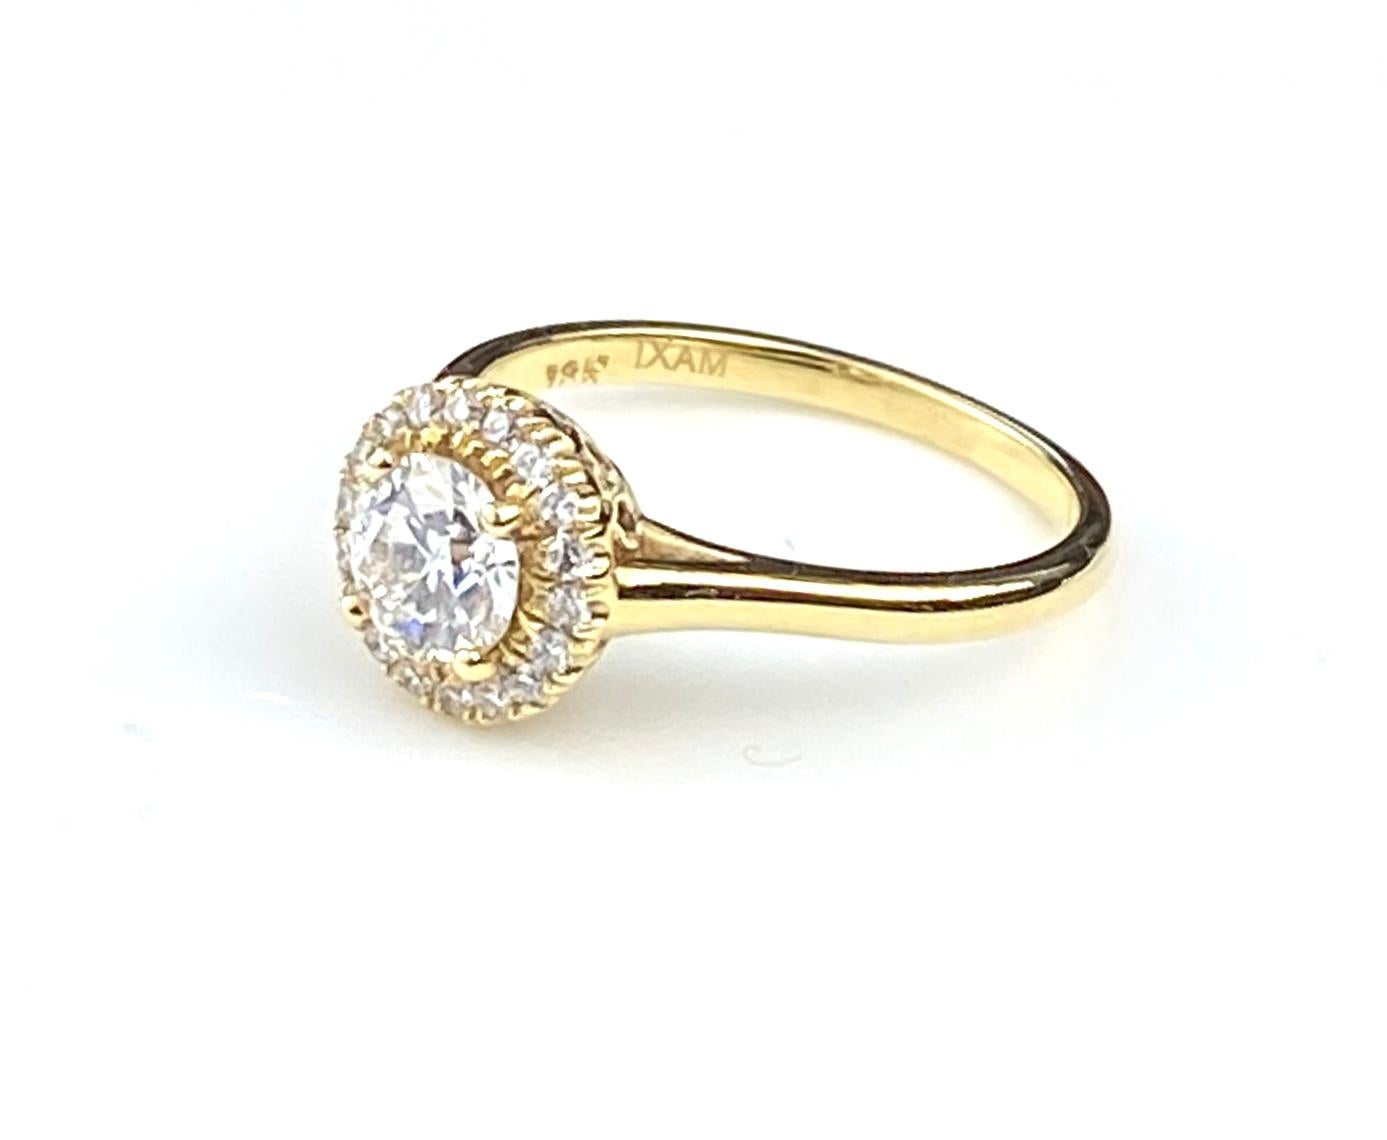 Round cut diamond yellow gold engagement ring with 0.72ct round brilliant center diamond, H SI2 GIA#2151618607. Set in 18kt yellow gold.  Halo set with 18 diamonds totaling 0.15ct, F/G colour and VS/SI1 clarity. Setting includes decorative basket